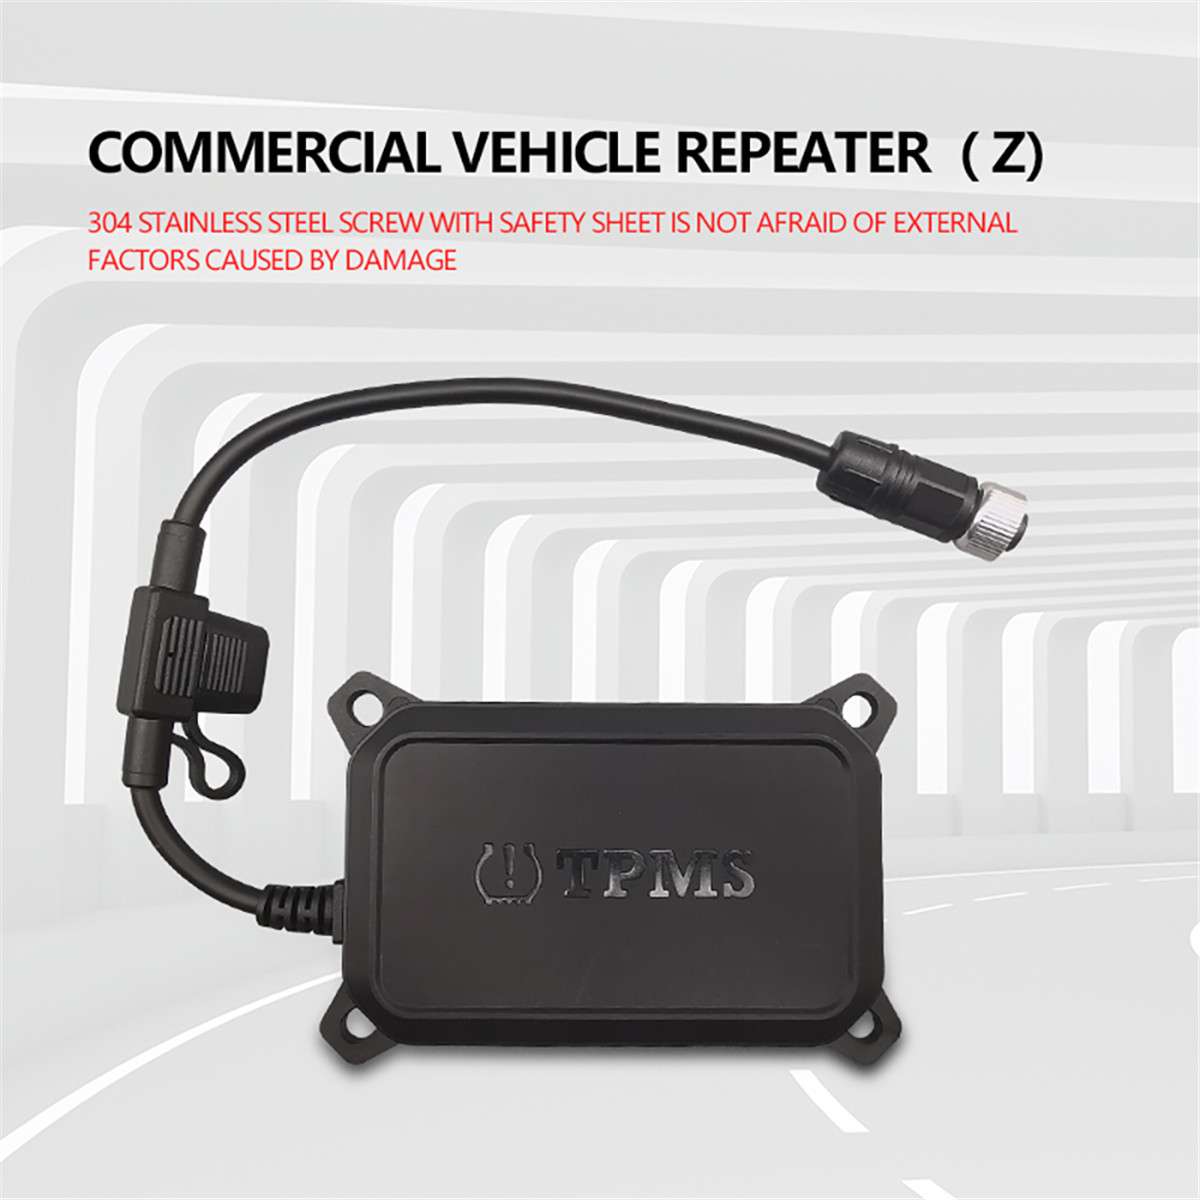 Commercial vehicle repeater01 (12)